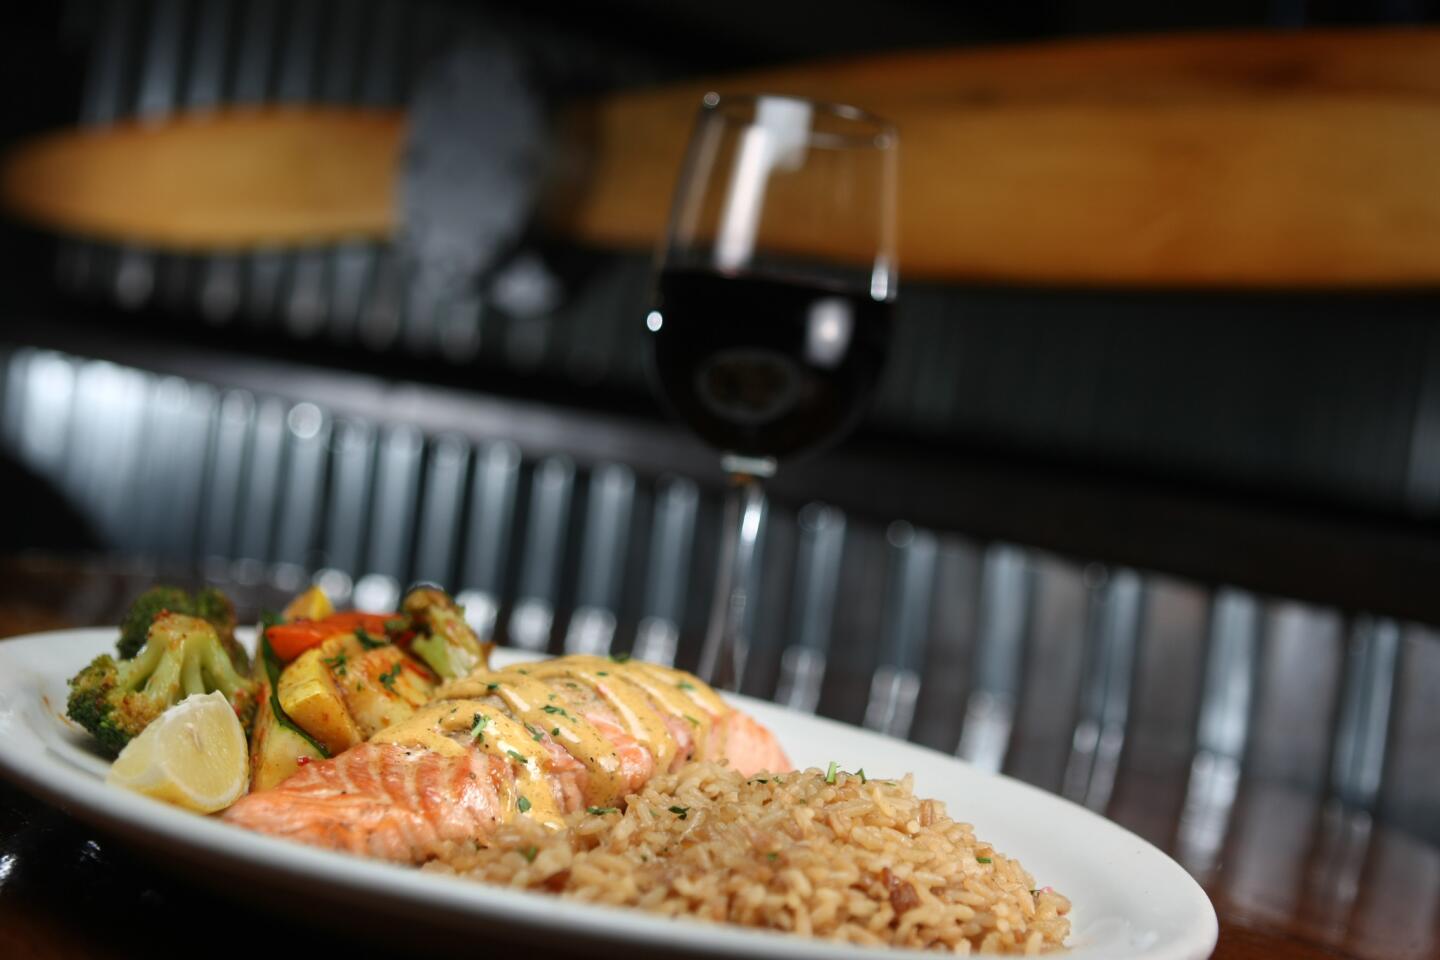 A favorite at the Hanger Grille in Burbank is the fresh grilled salmon stuffed with crab meat filling and topped with a red pepper aioli sauce with a side of rice pilaf and saut¿ed vegetables. Photographed on Thursday, October 29, 2015.